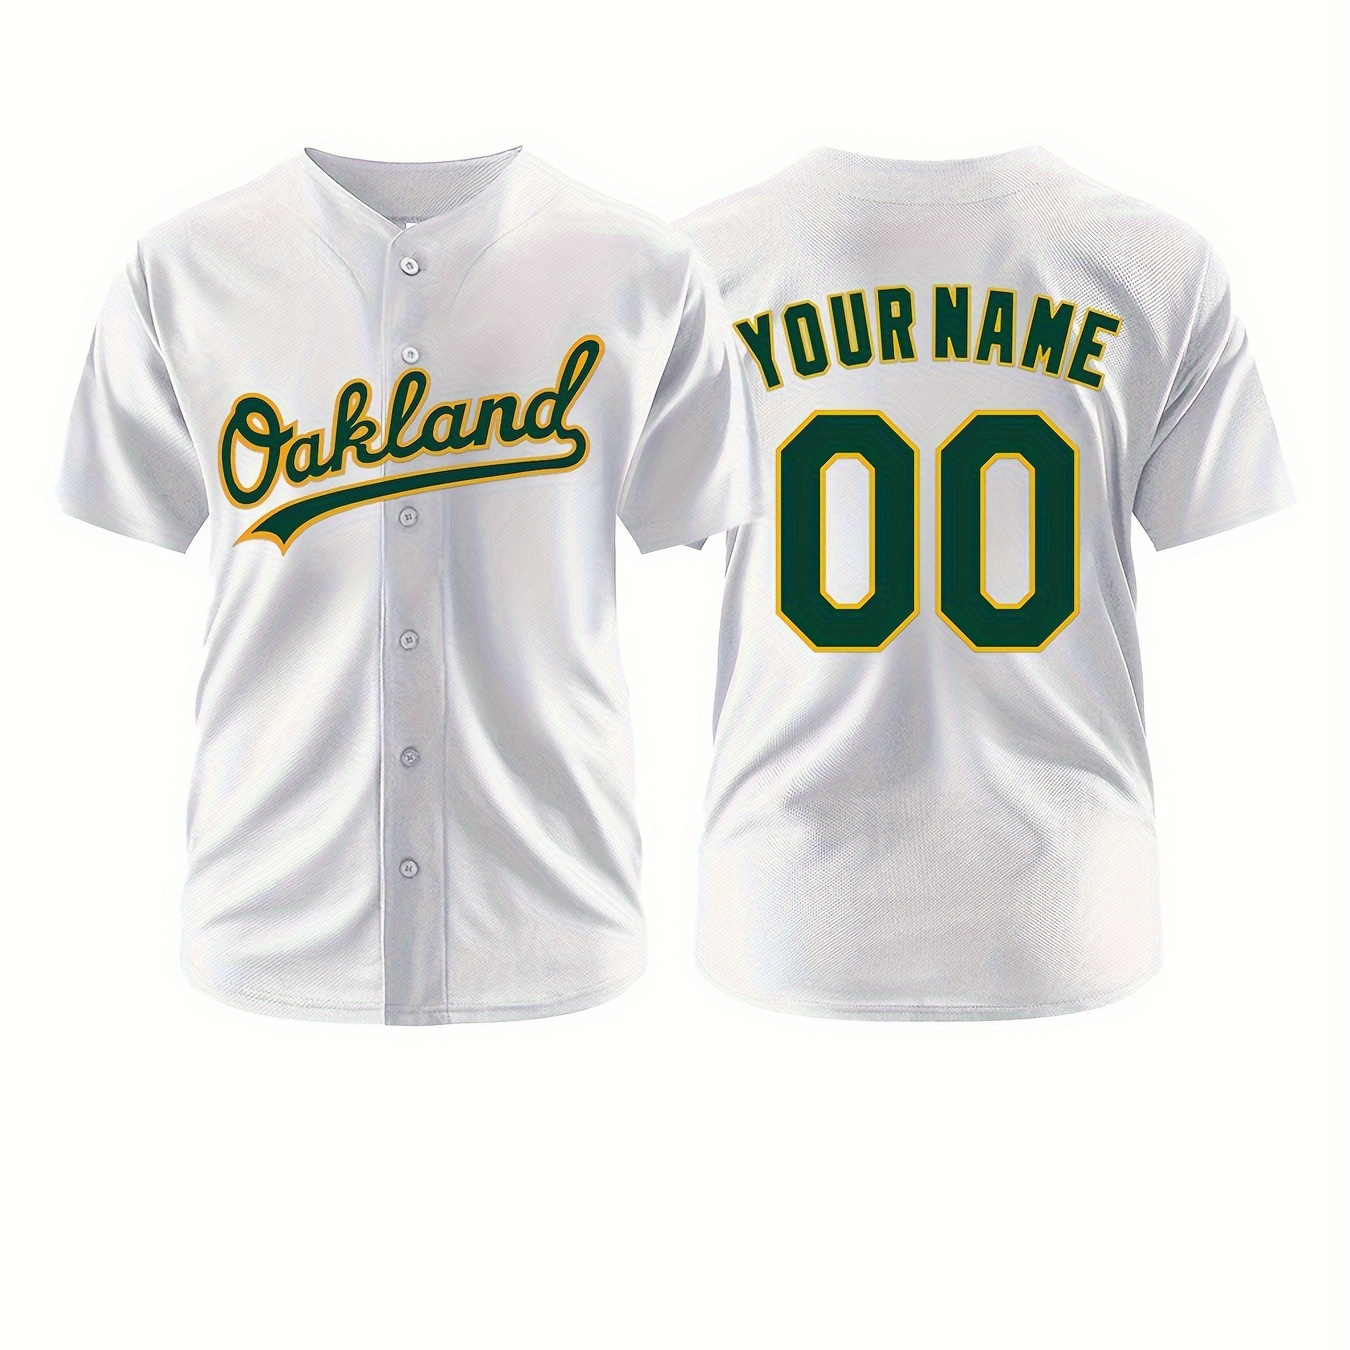 

Custom Men's Baseball Jersey, Leisure Sports Style, Personalized Name And Number, Athletic Team Uniform, As Gifts